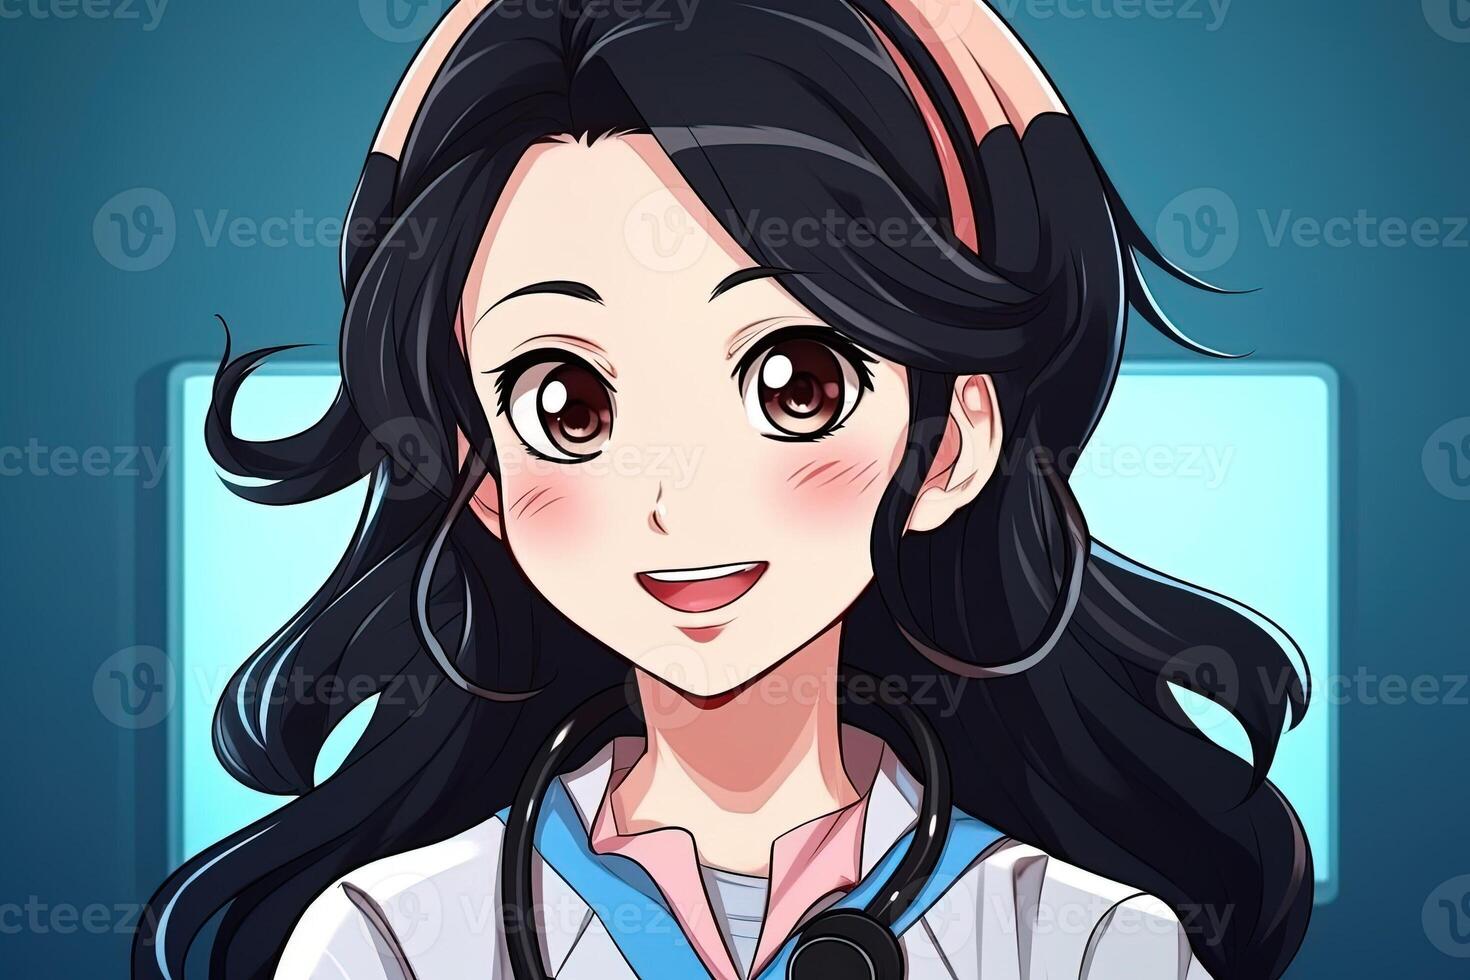 donalyn castillo recommends black haired anime female pic